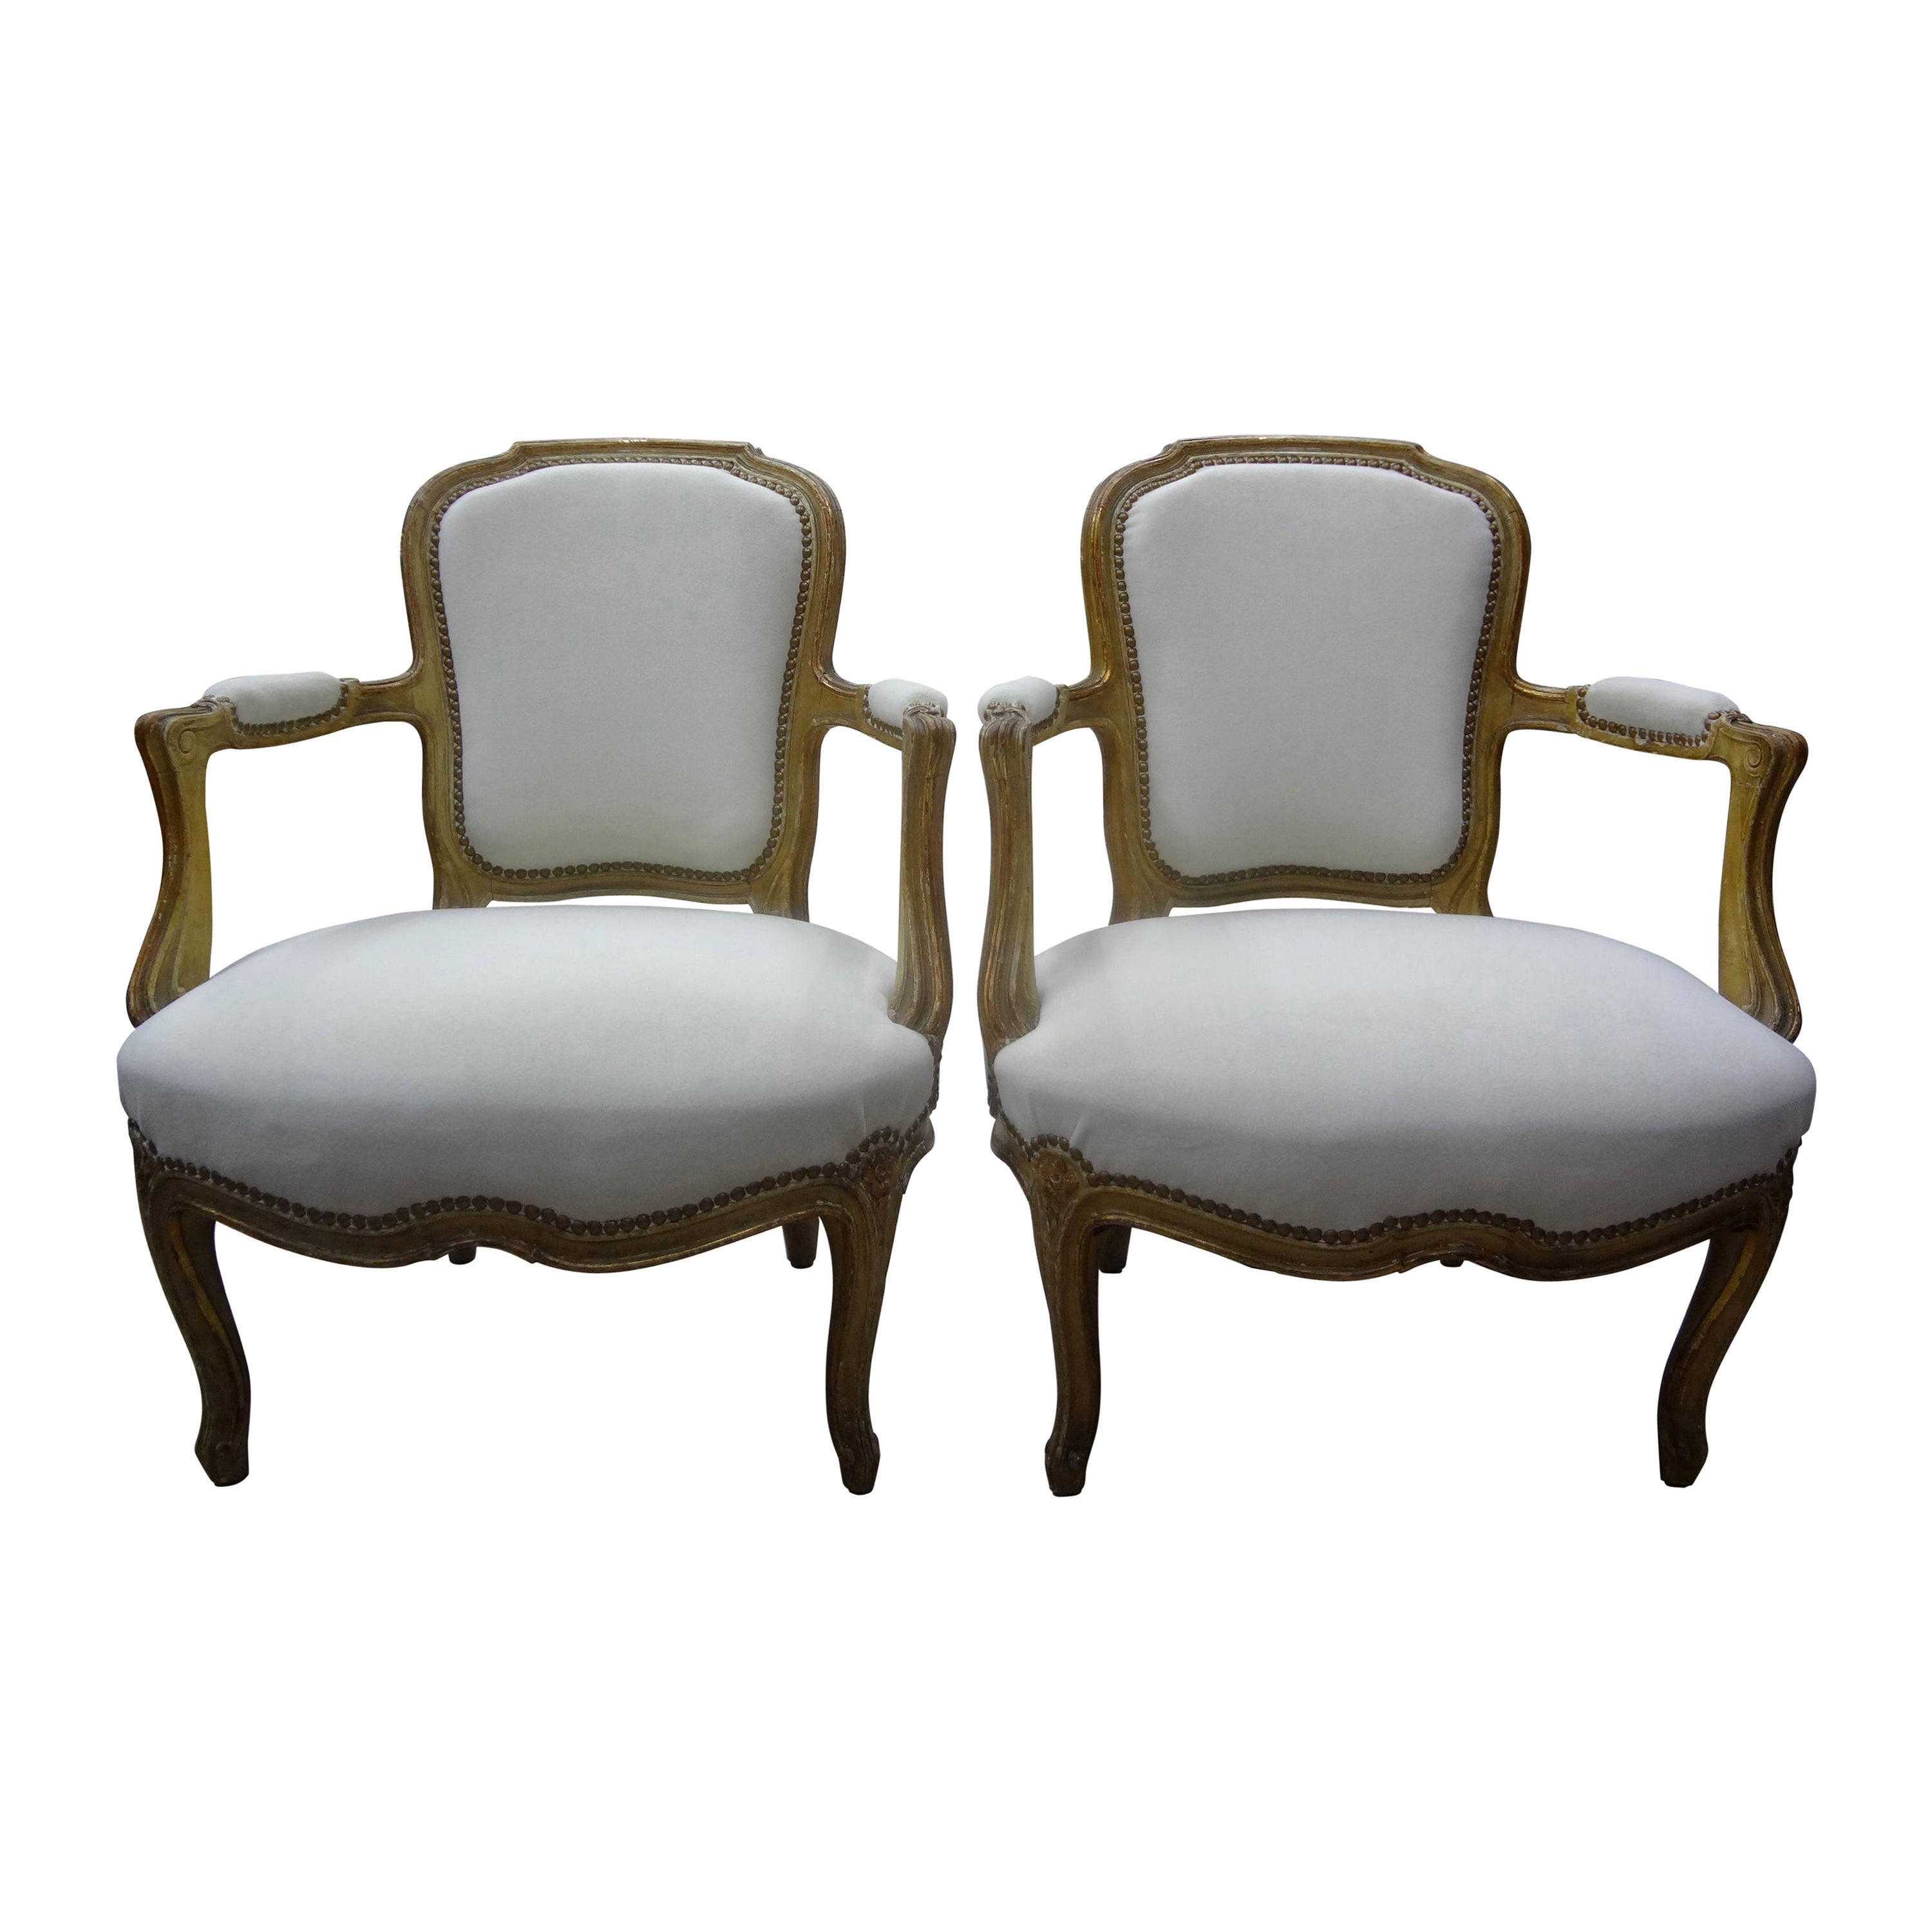 Pair of 19th Century French Louis XVI Style Chairs